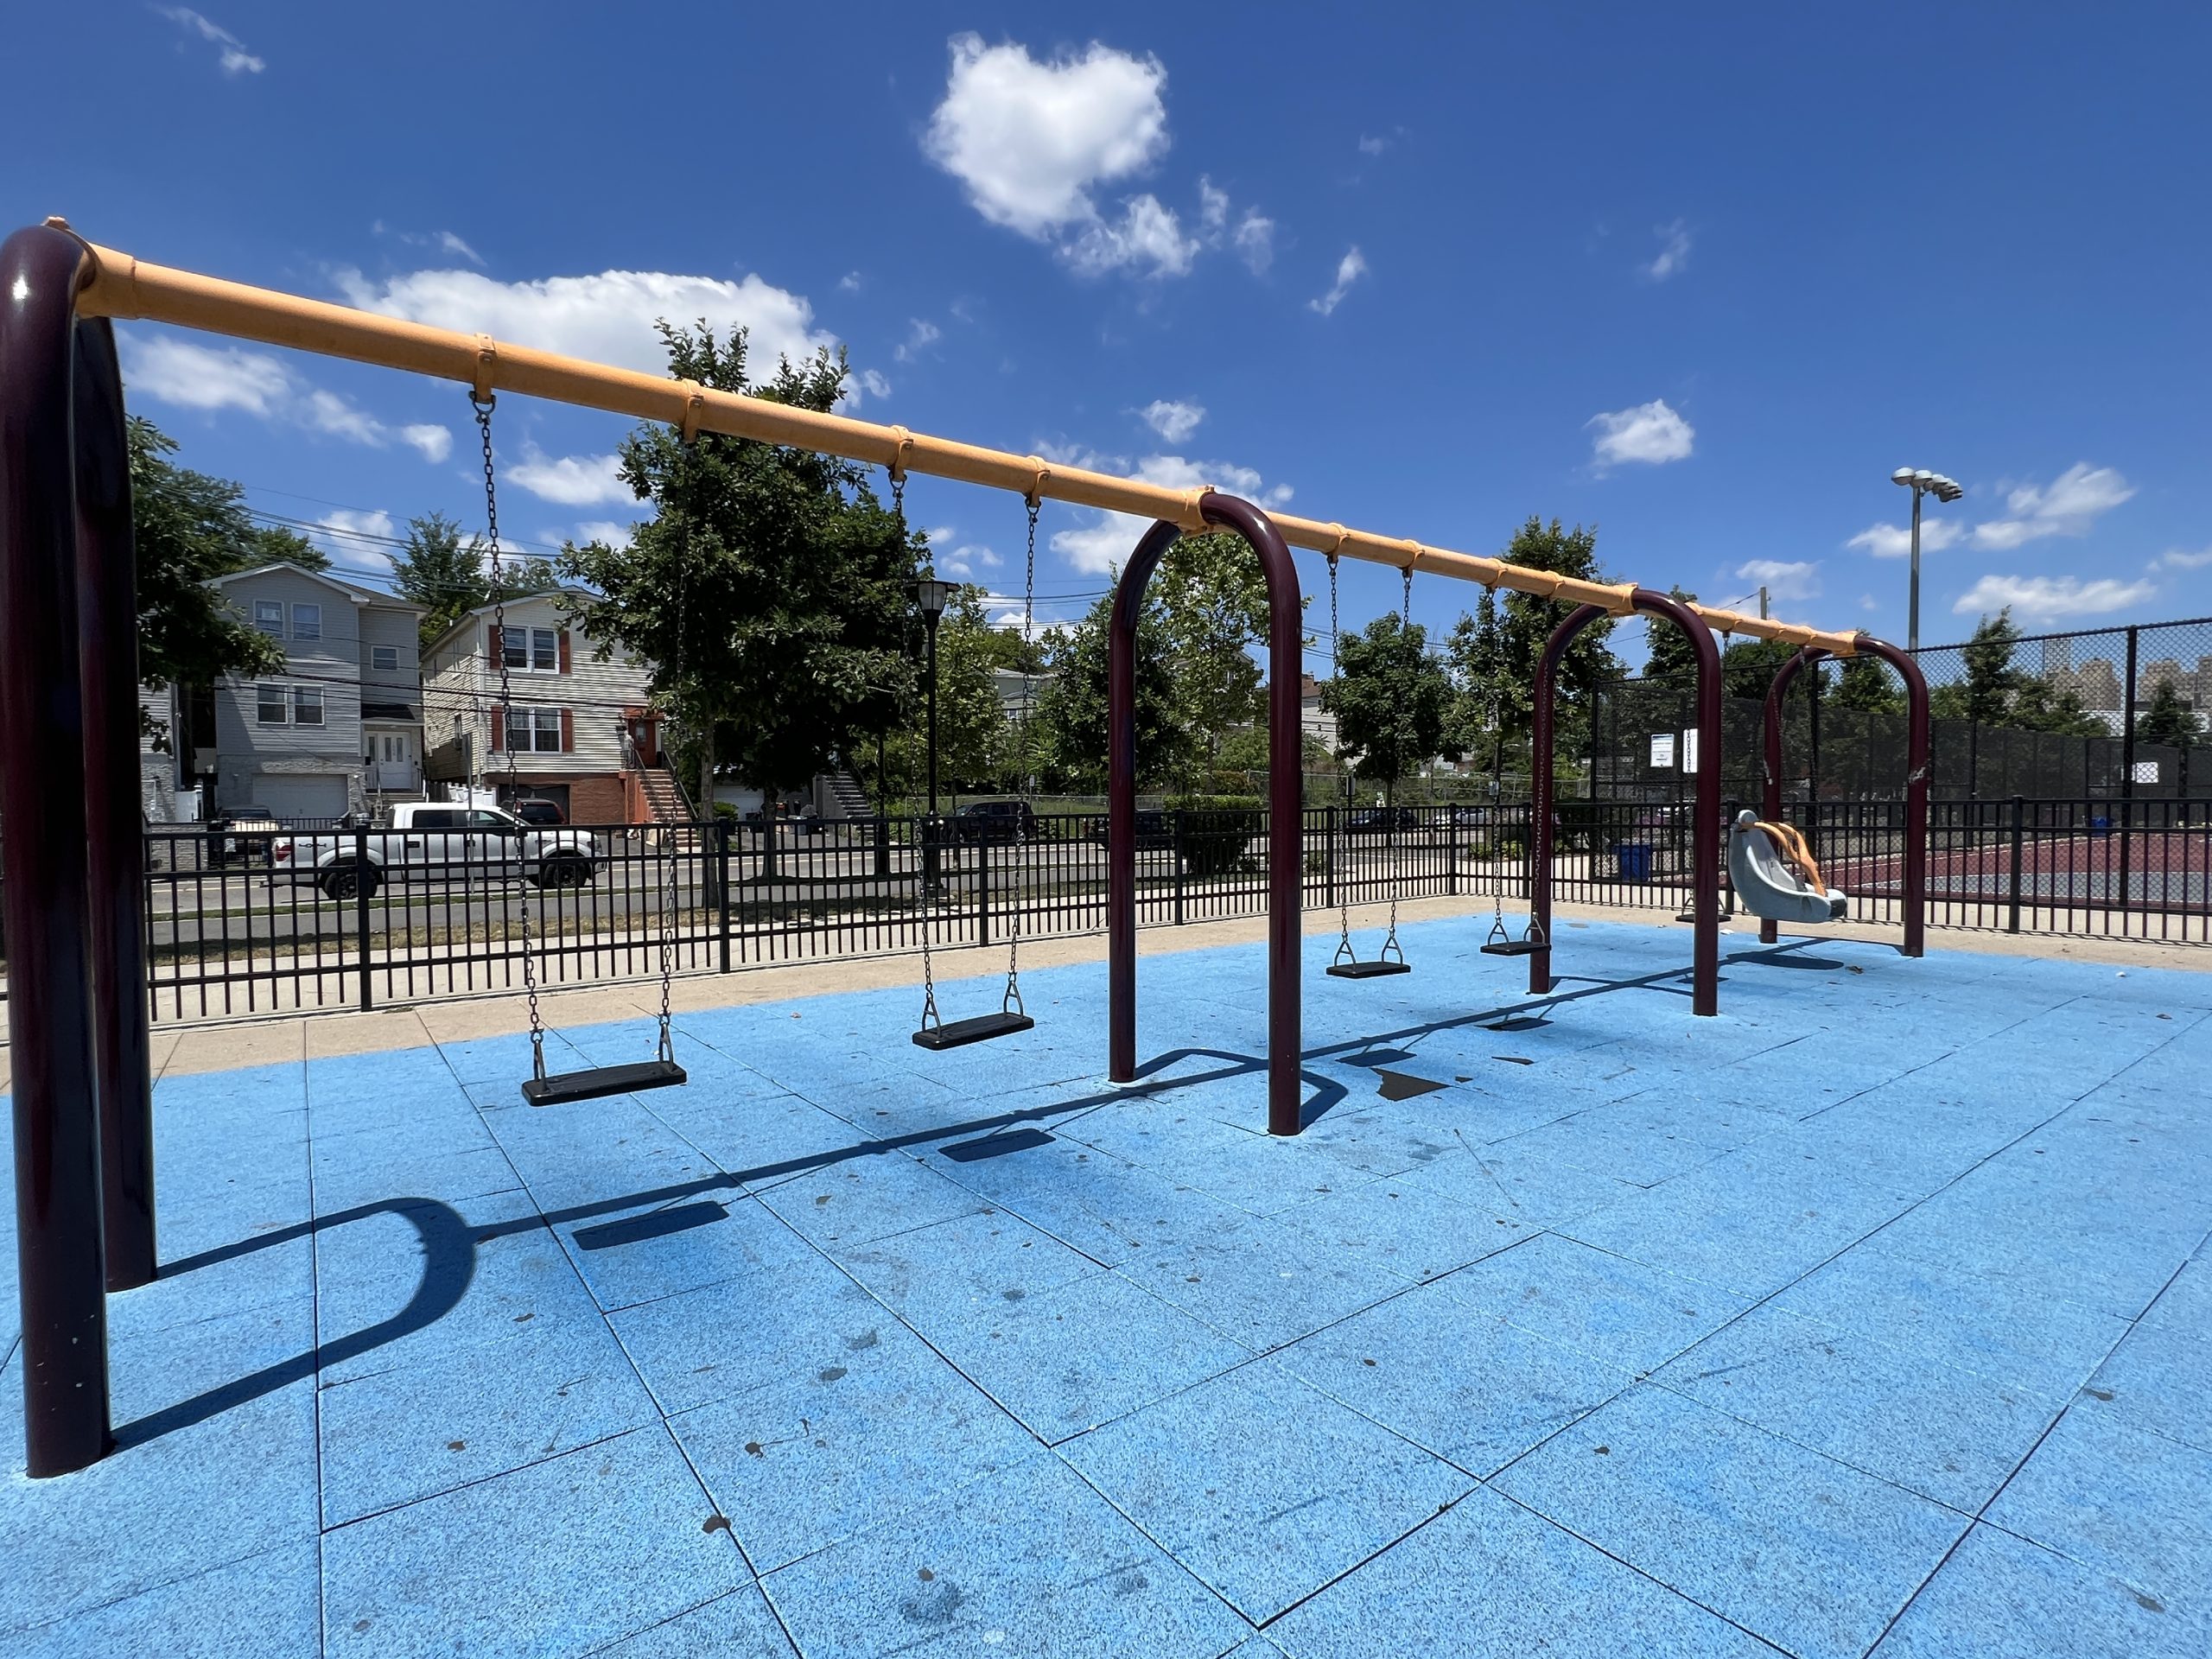 Berry Lane Park Playground in Jersey City NJ swings traditional